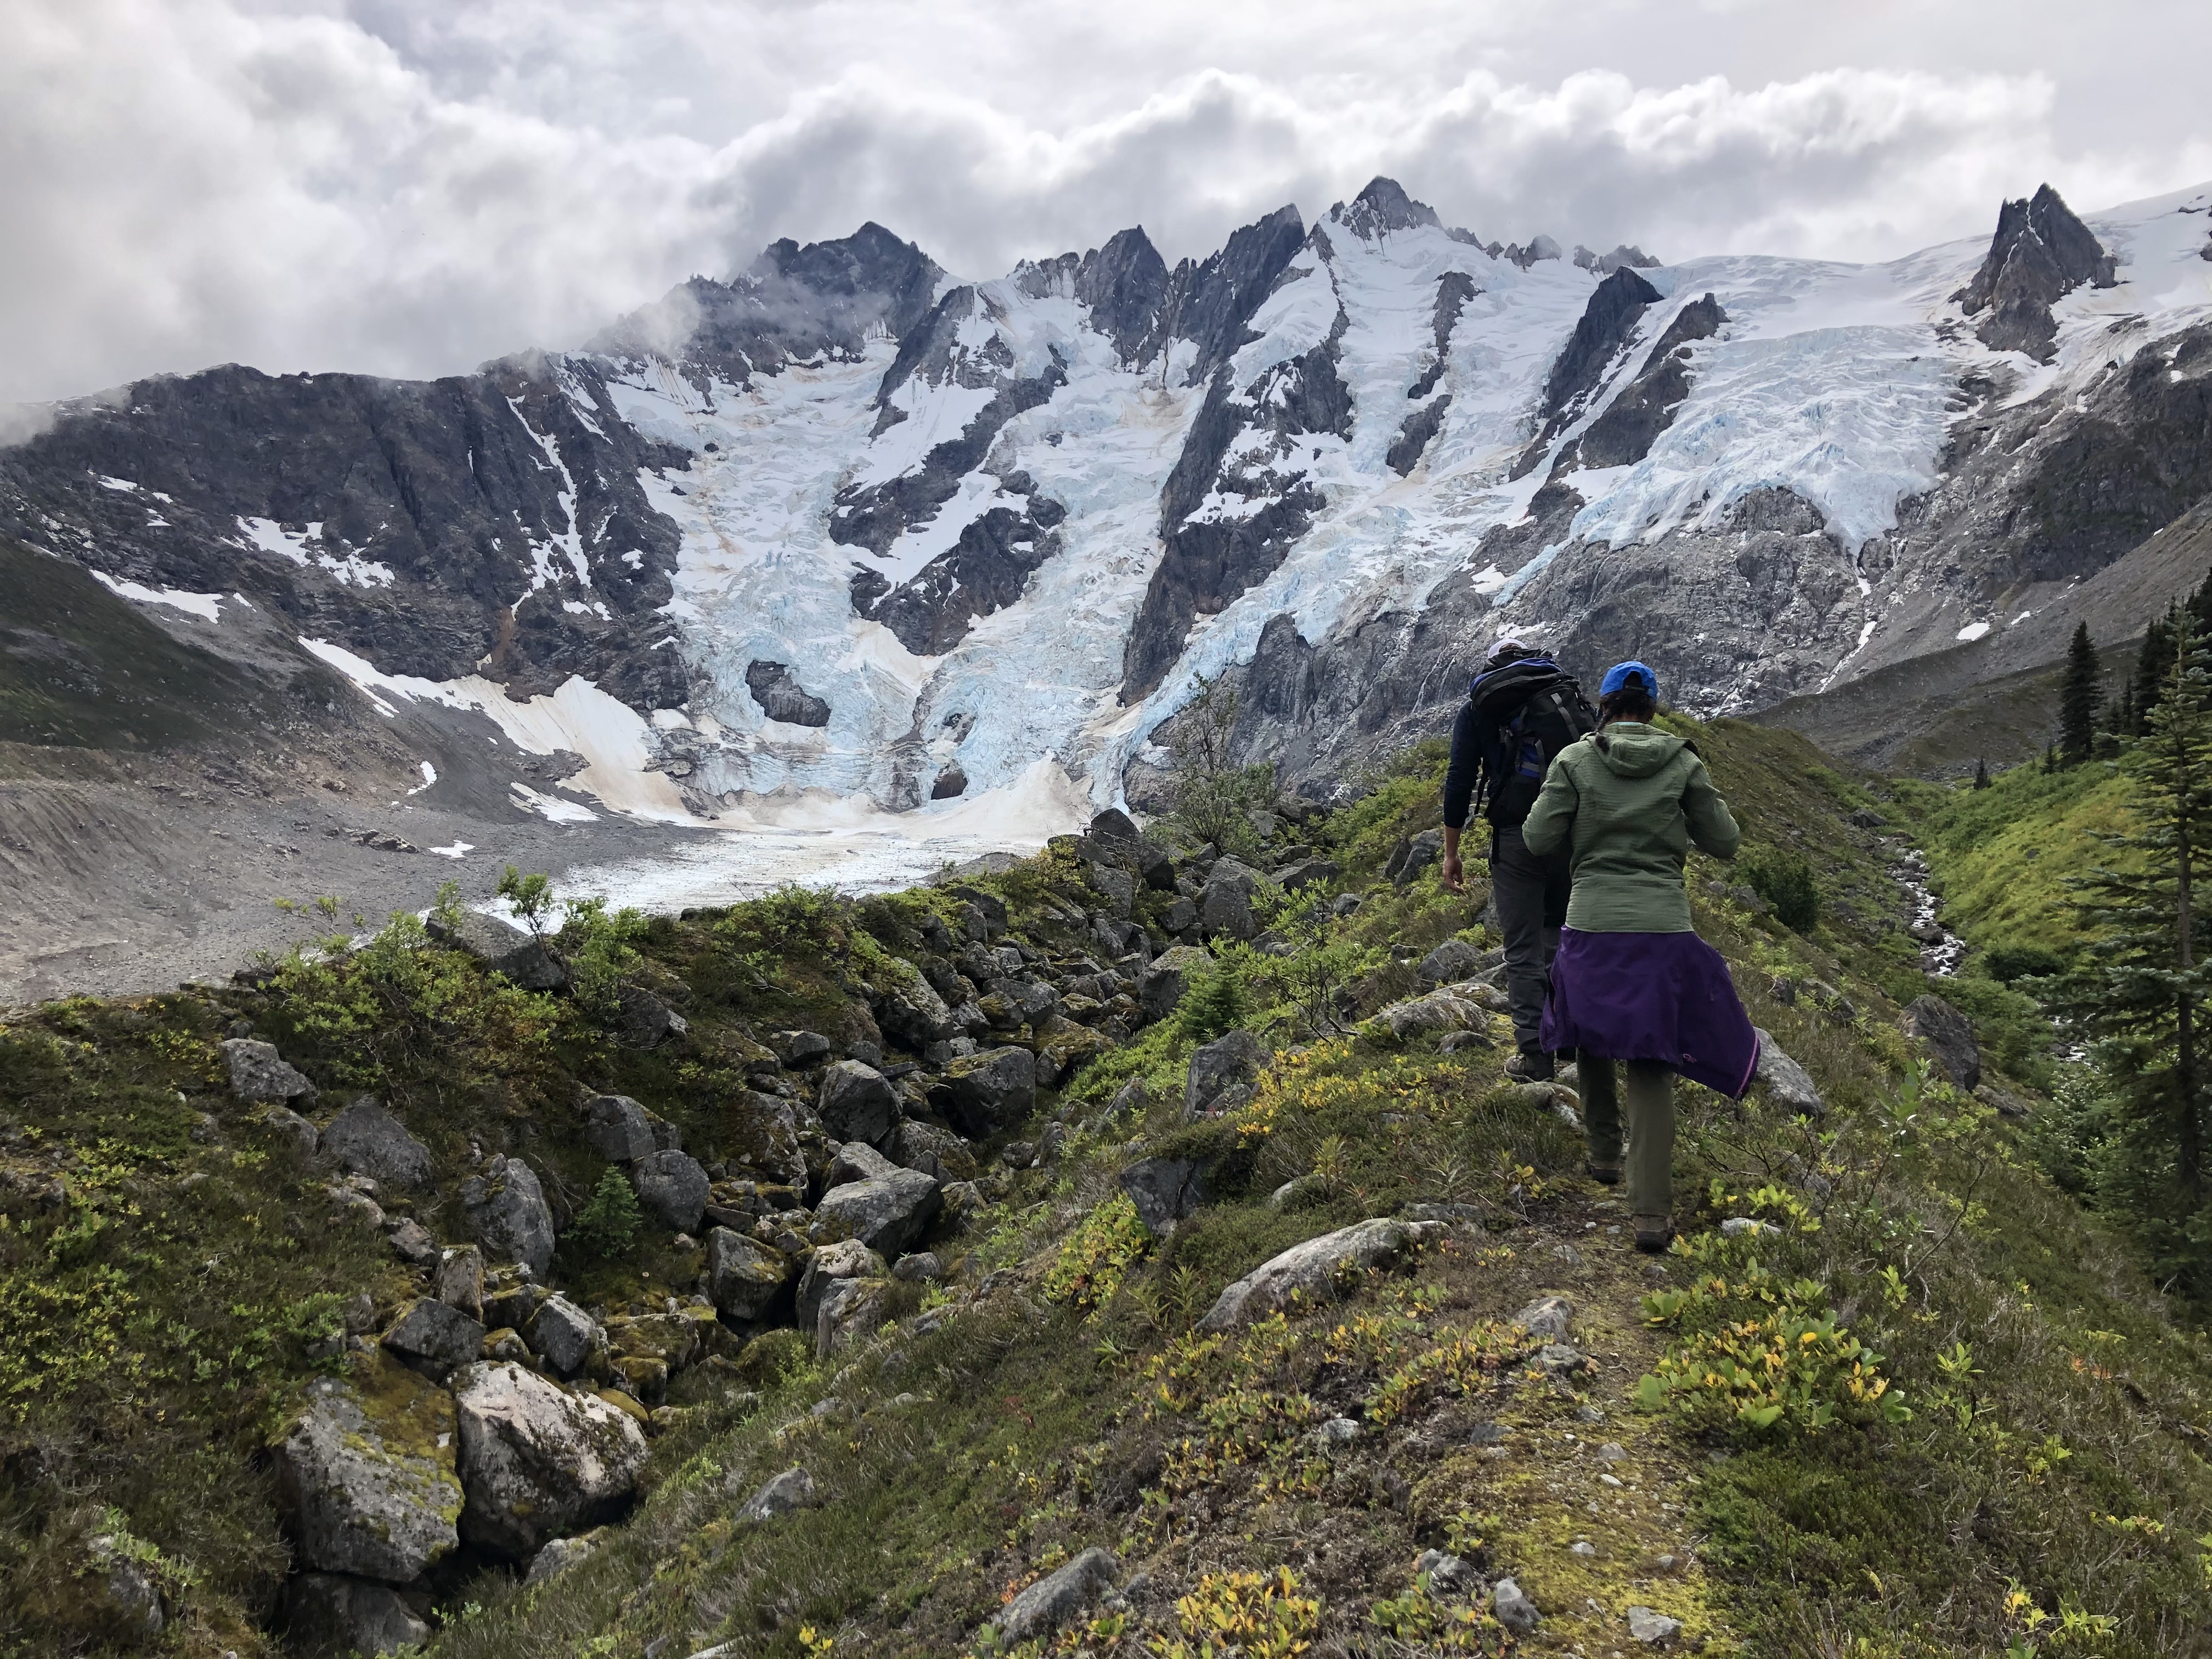 The latest from Alaskan Hardgear  When nature offers cues to hibernate or  head south, the people who thrive here pay no mind. Not when there's snow  to carve. Glaciers to tread.